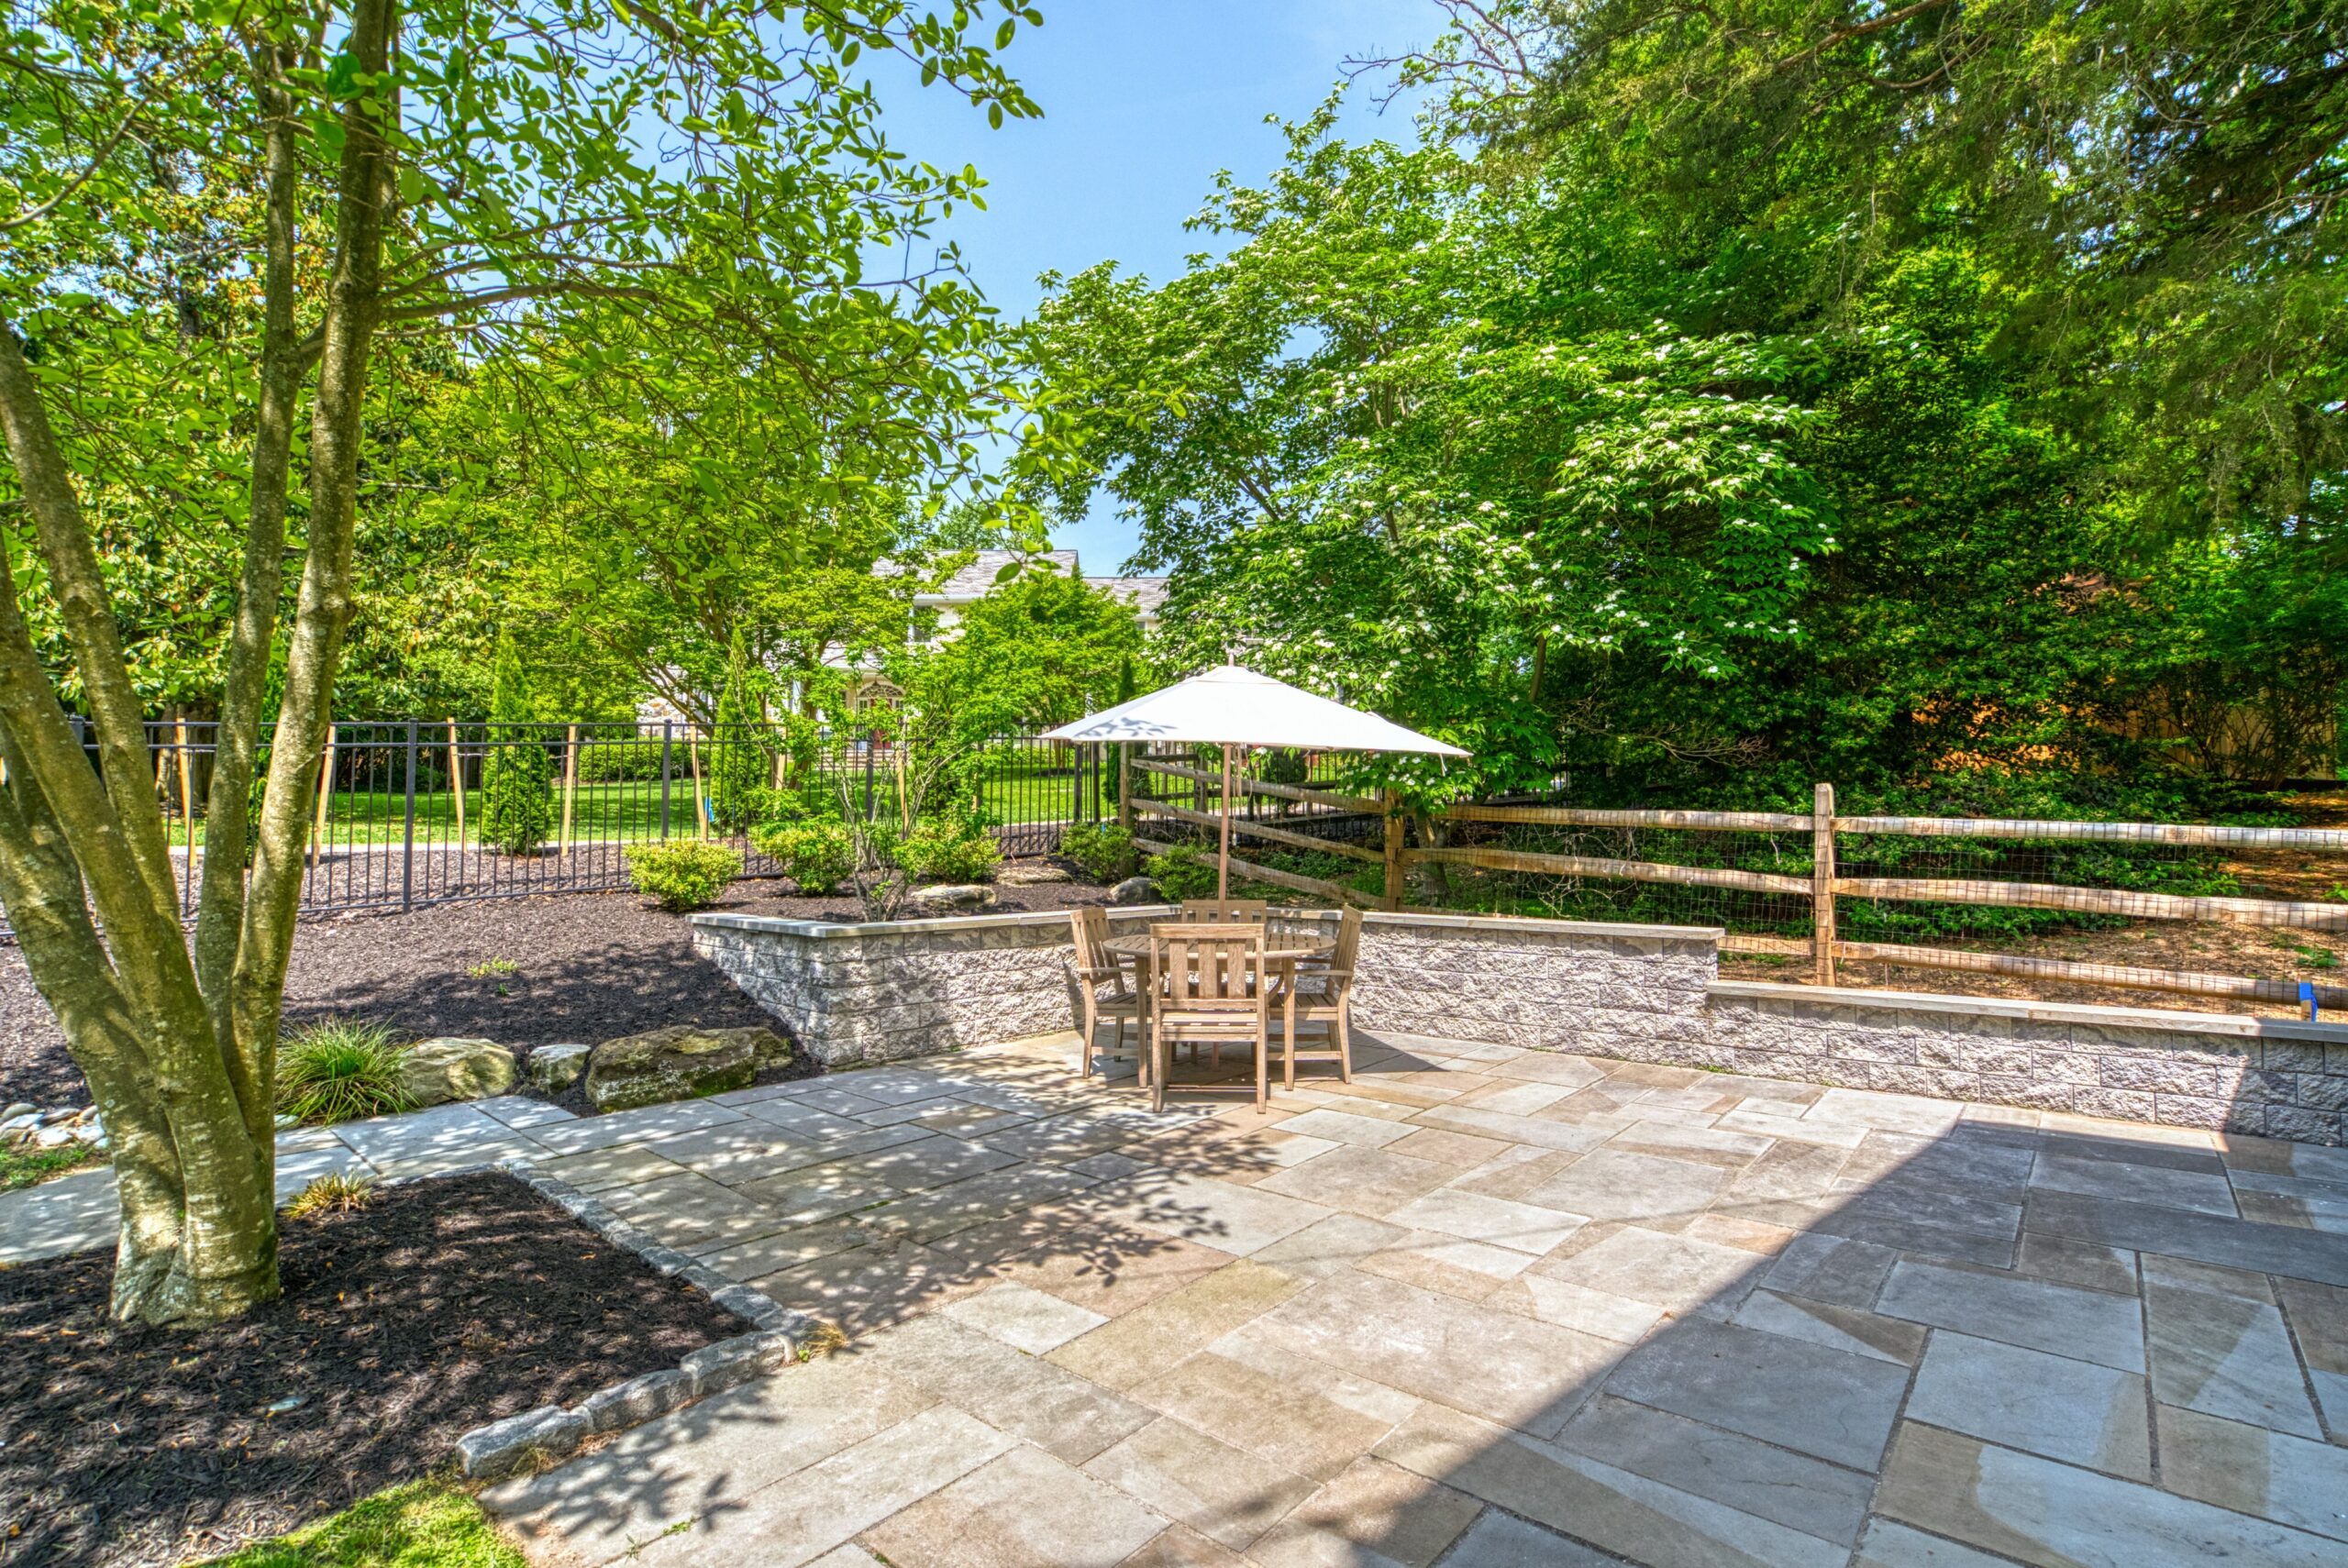 Professional exterior photo of 209 Norwood Road, Annapolis, MD - showing the flag stone patio with retaining wall, fence, and landscaping and patio furniture with umbrella